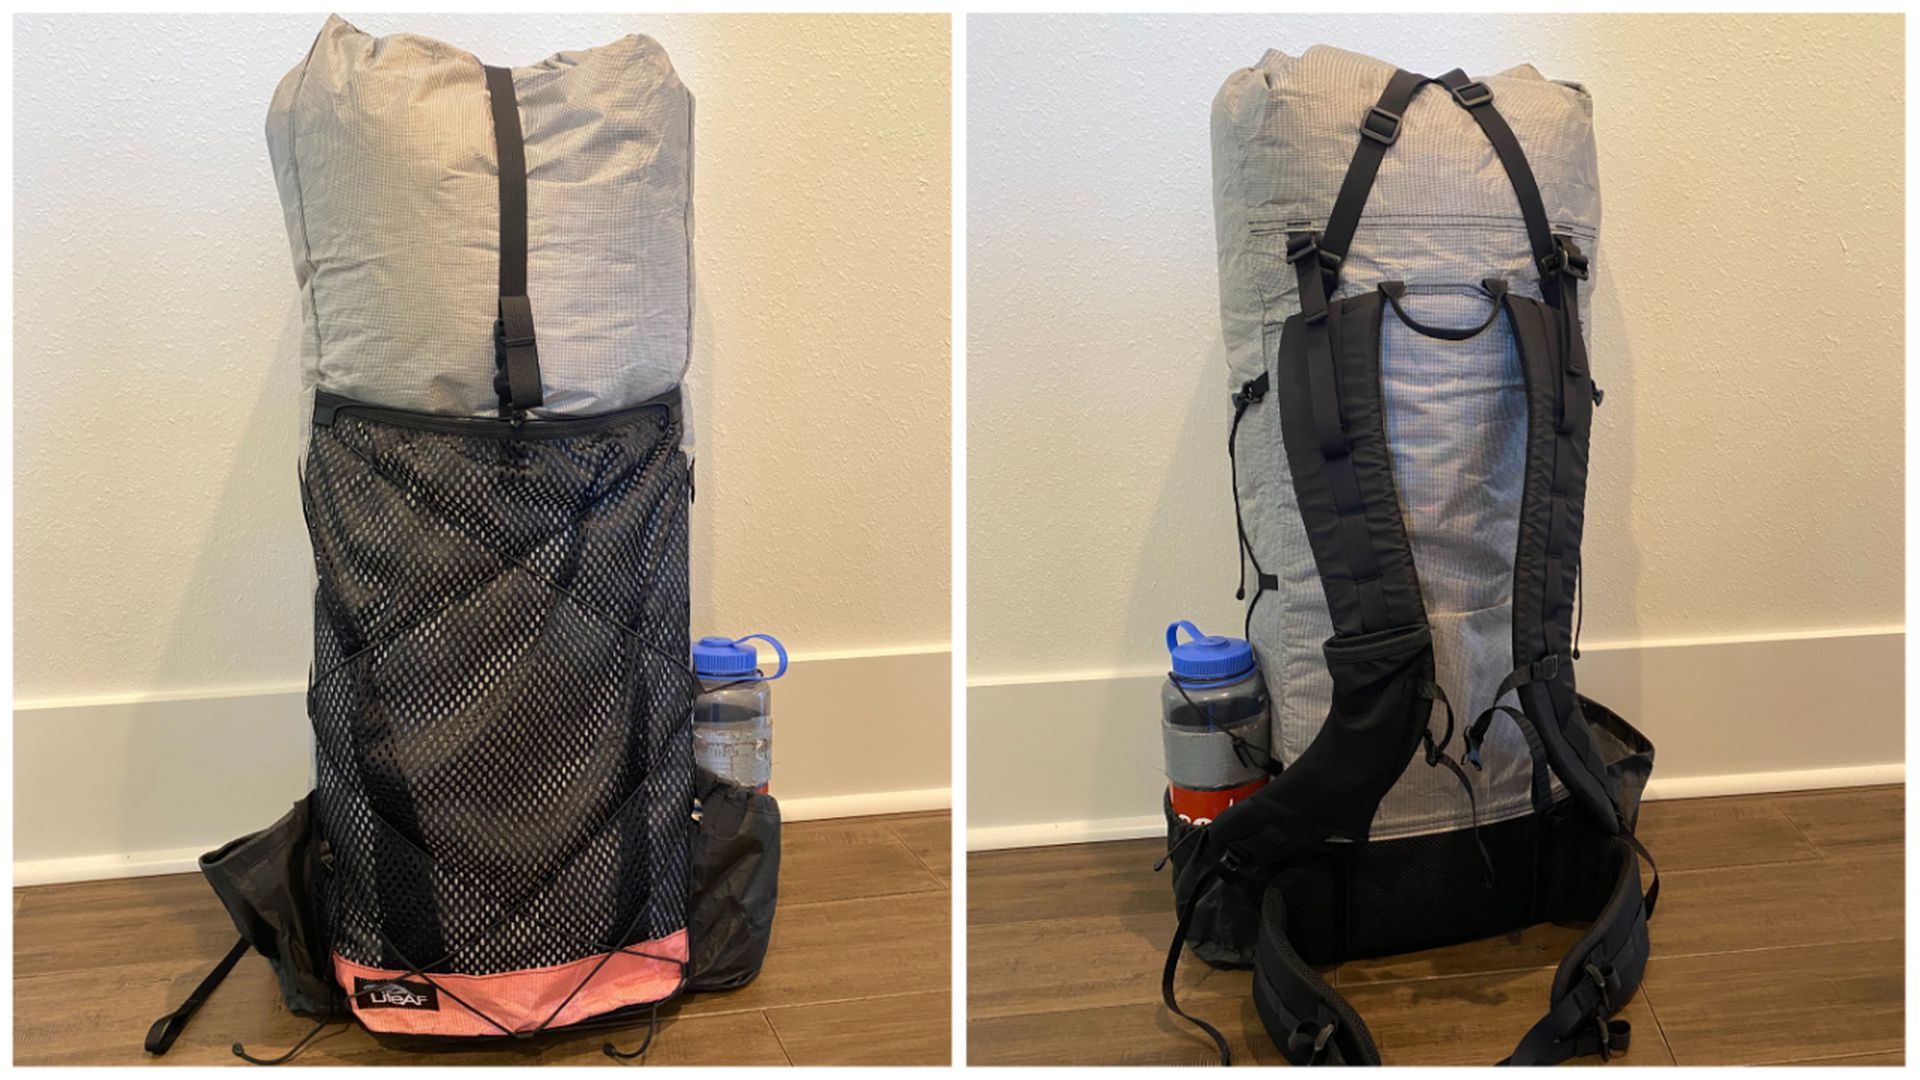 A packed ultralight backpack.